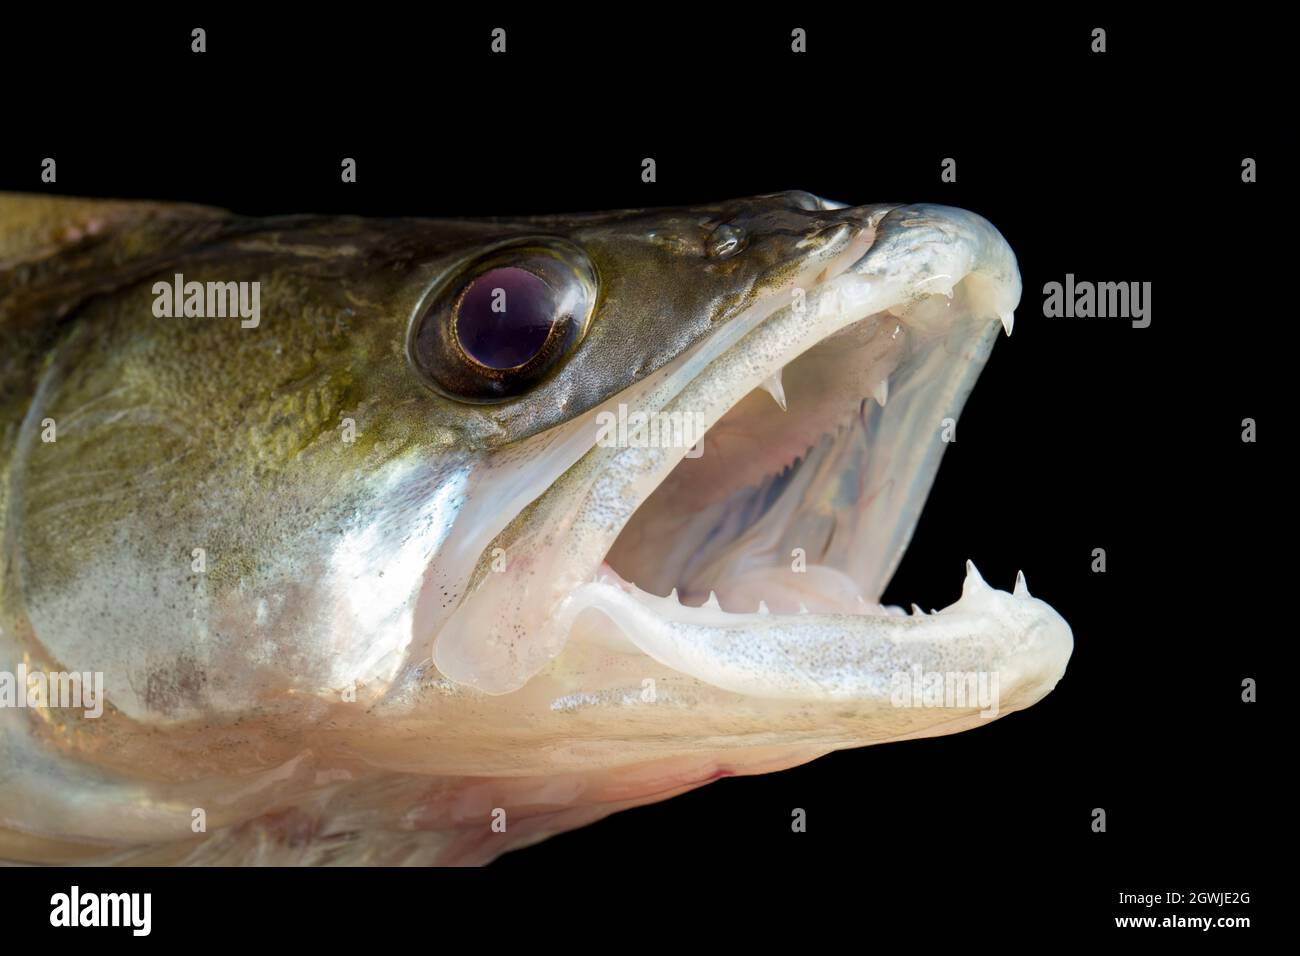 The head and jaws of a Zander, Sander lucioperca. Zander are a predatory species that preys on other fish. They are a non native invasive species in t Stock Photo